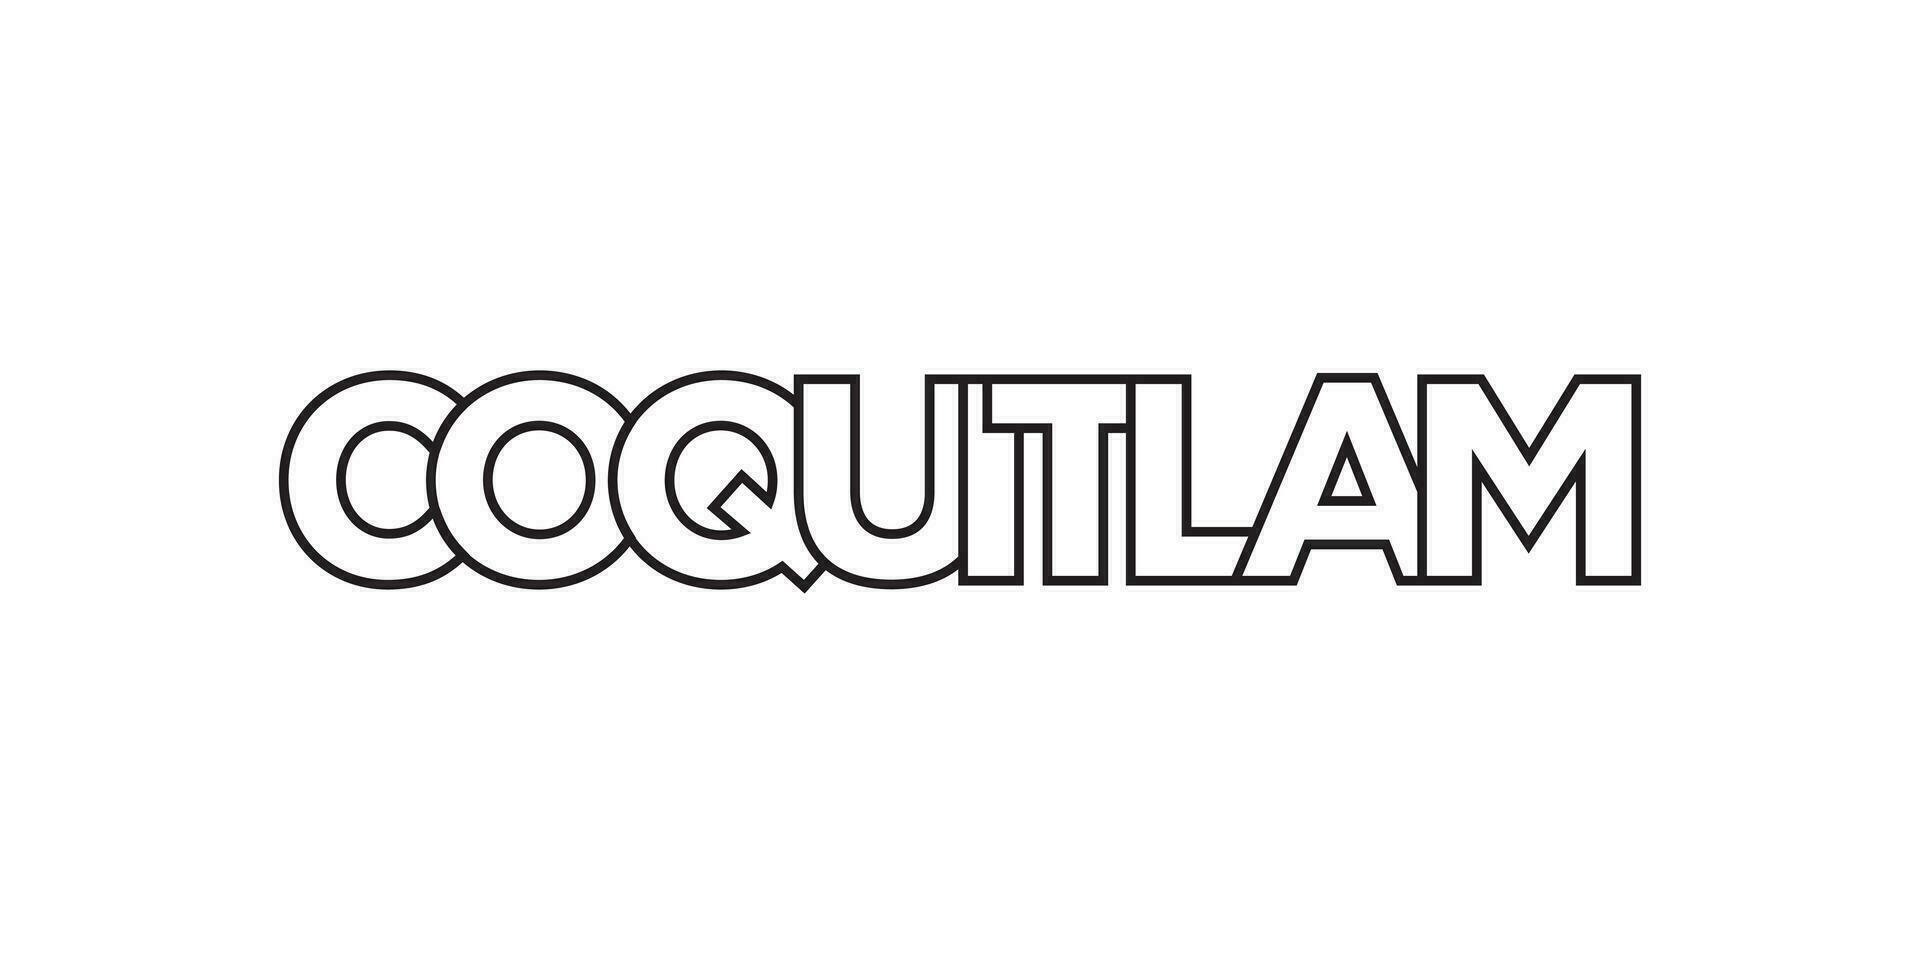 Coquitlam in the Canada emblem. The design features a geometric style, vector illustration with bold typography in a modern font. The graphic slogan lettering.